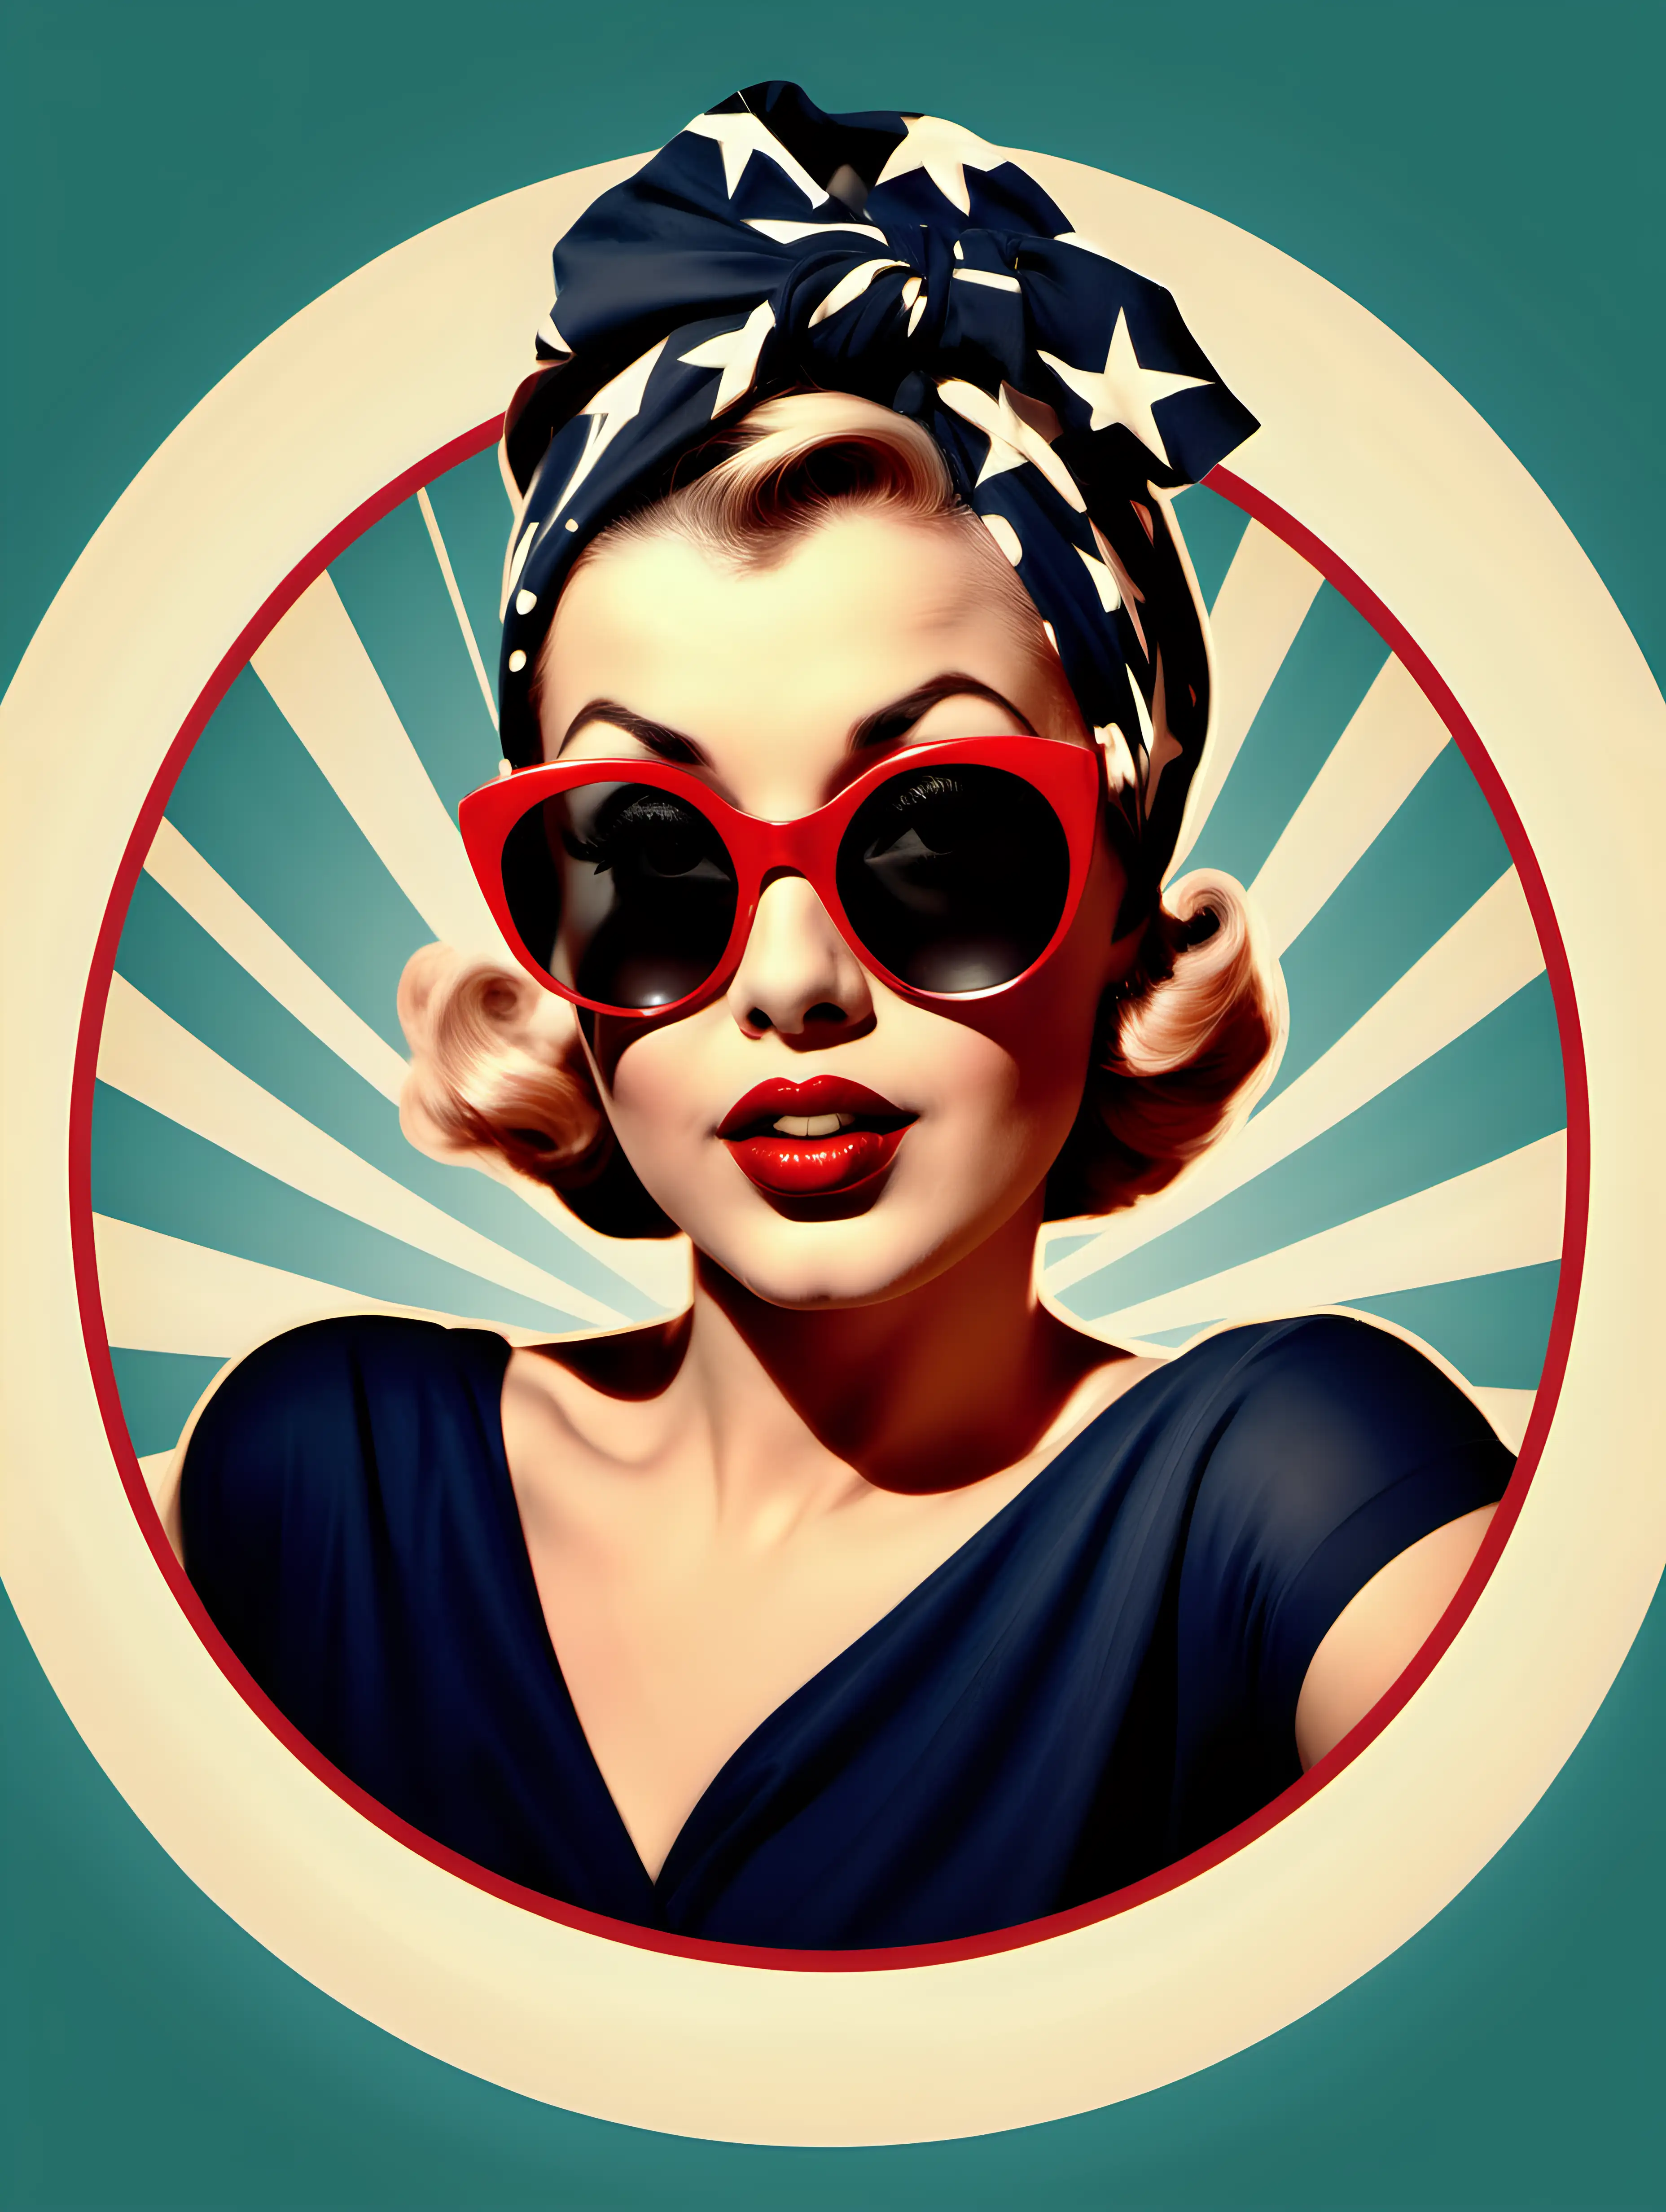 Vintage Hollywood Pinup Woman with Confident Flare and Sassy Pose